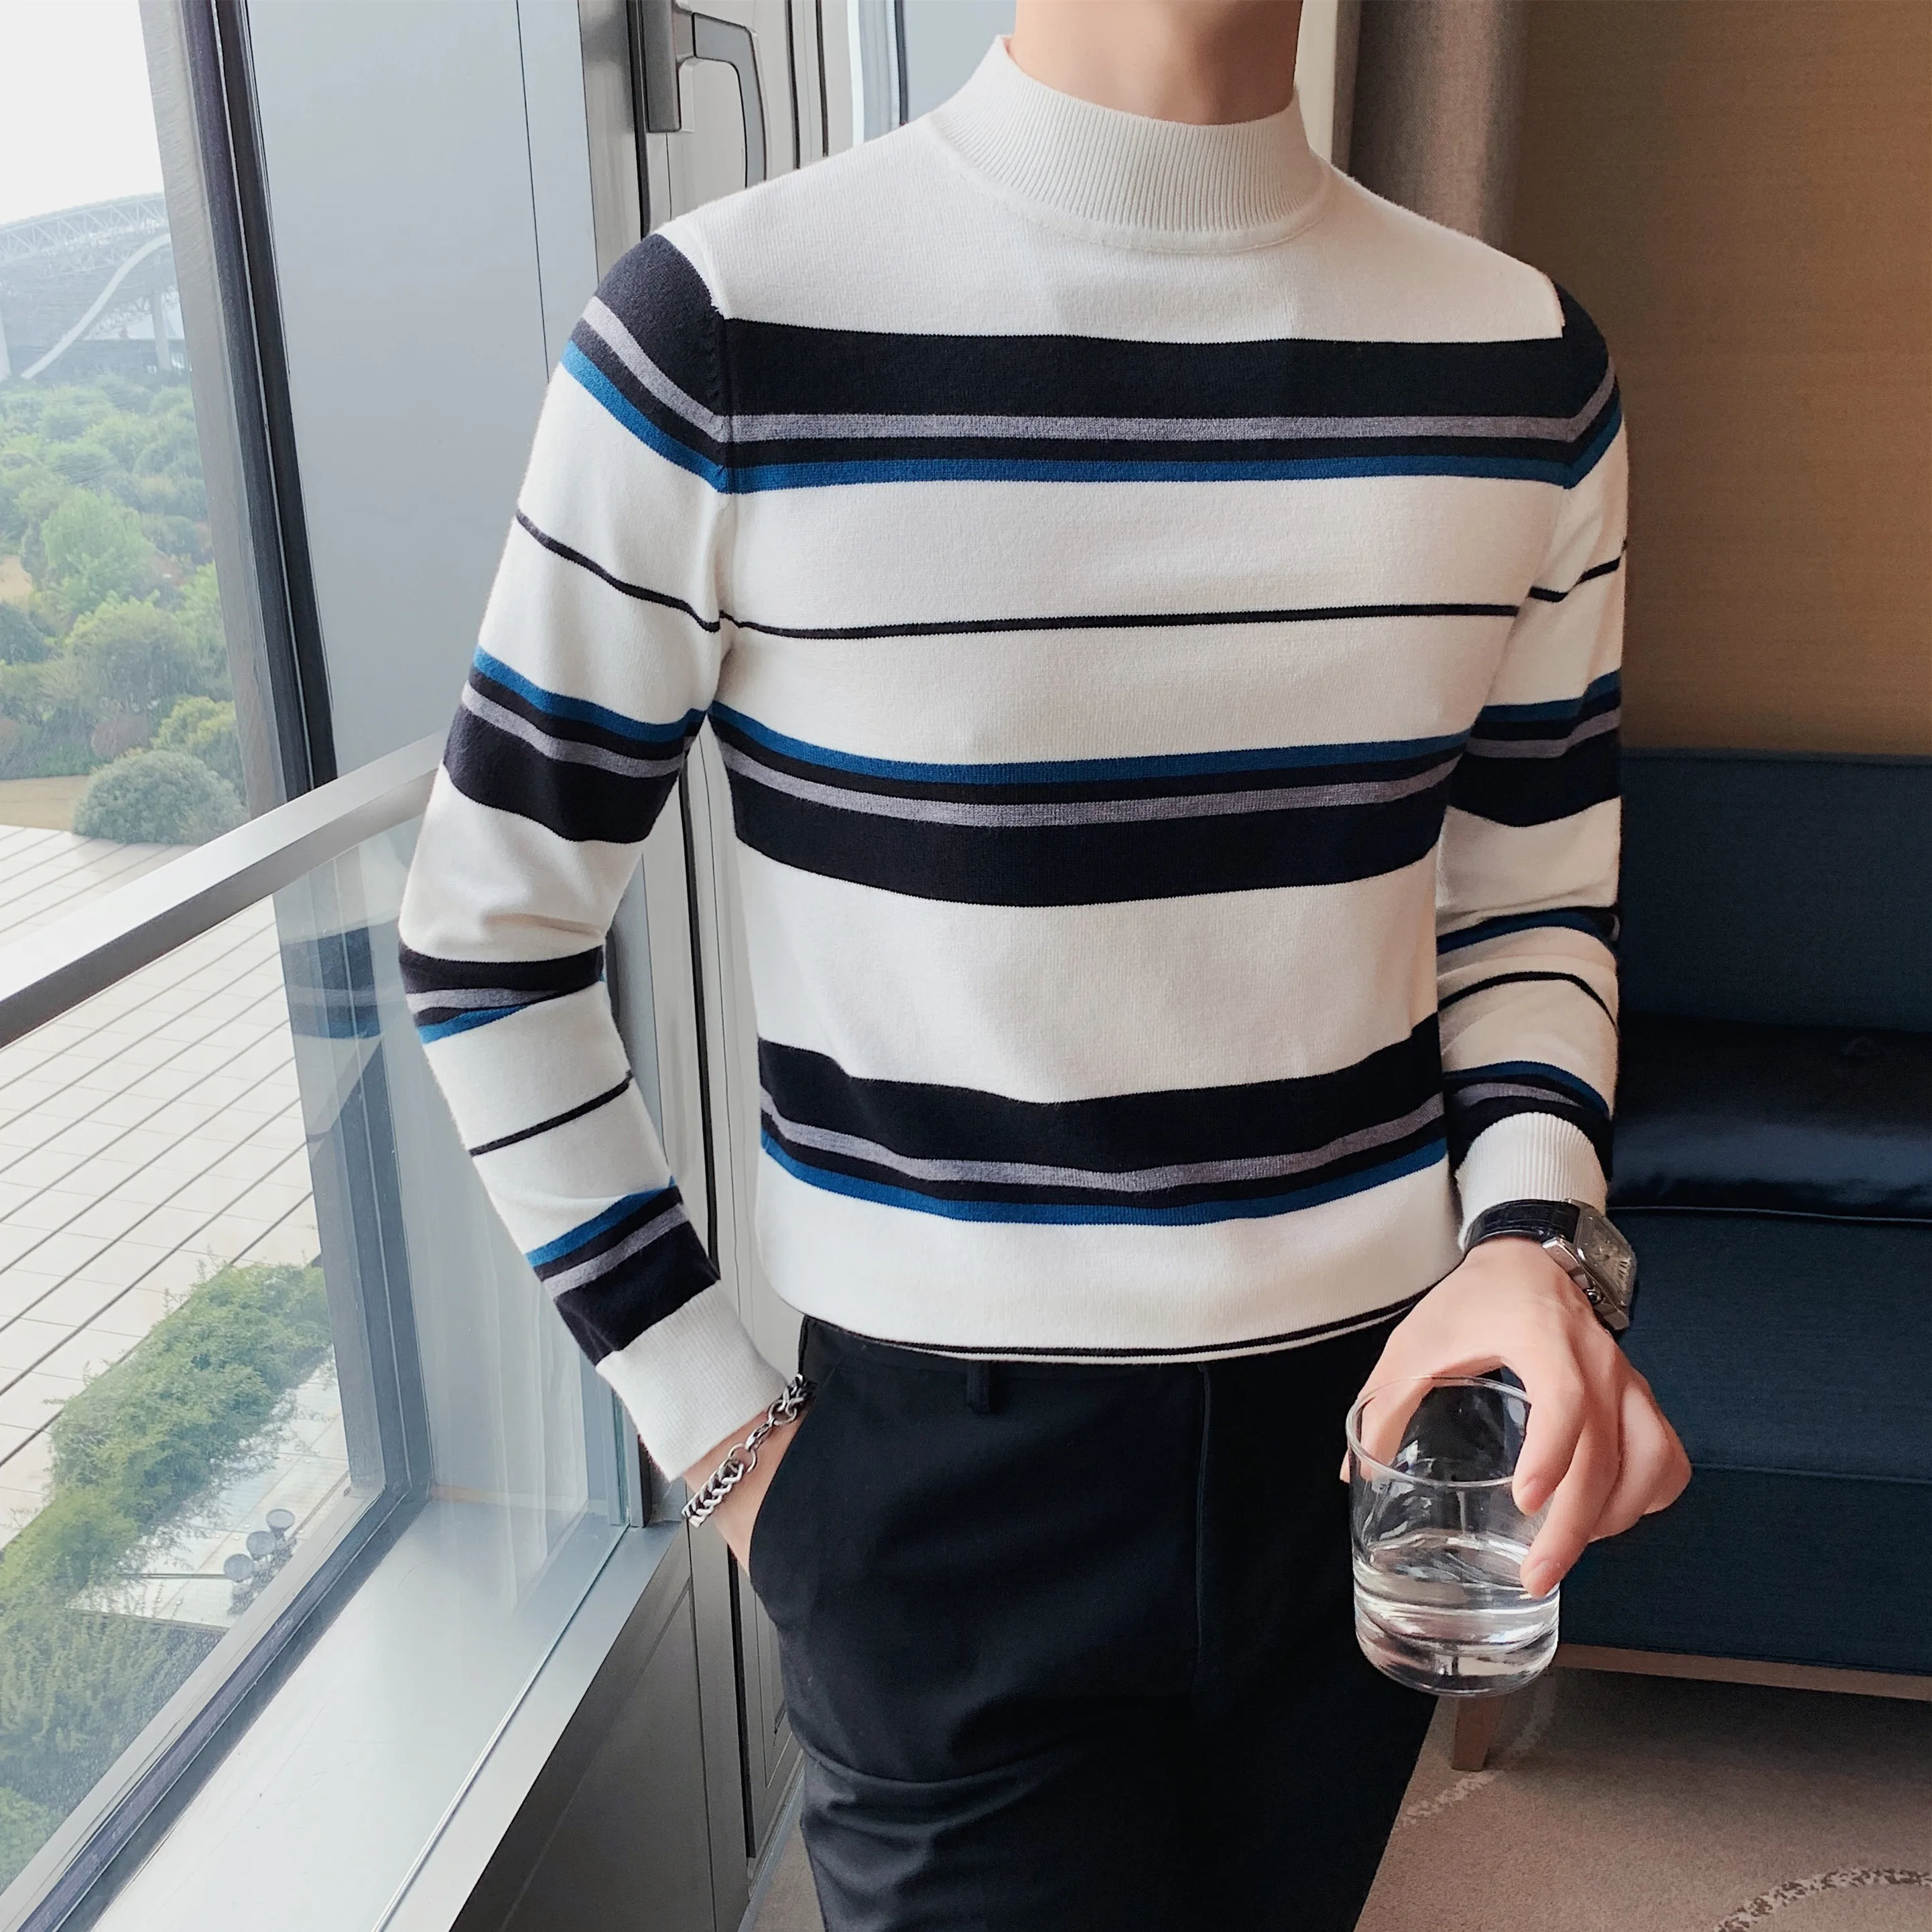 2022 Men Pullovers Slim Sweaters Autumn Winter Thick Warm Men's Sweater  Casual Round Collar Knitwear Sweater Men Brand Clothing - Pullovers -  AliExpress